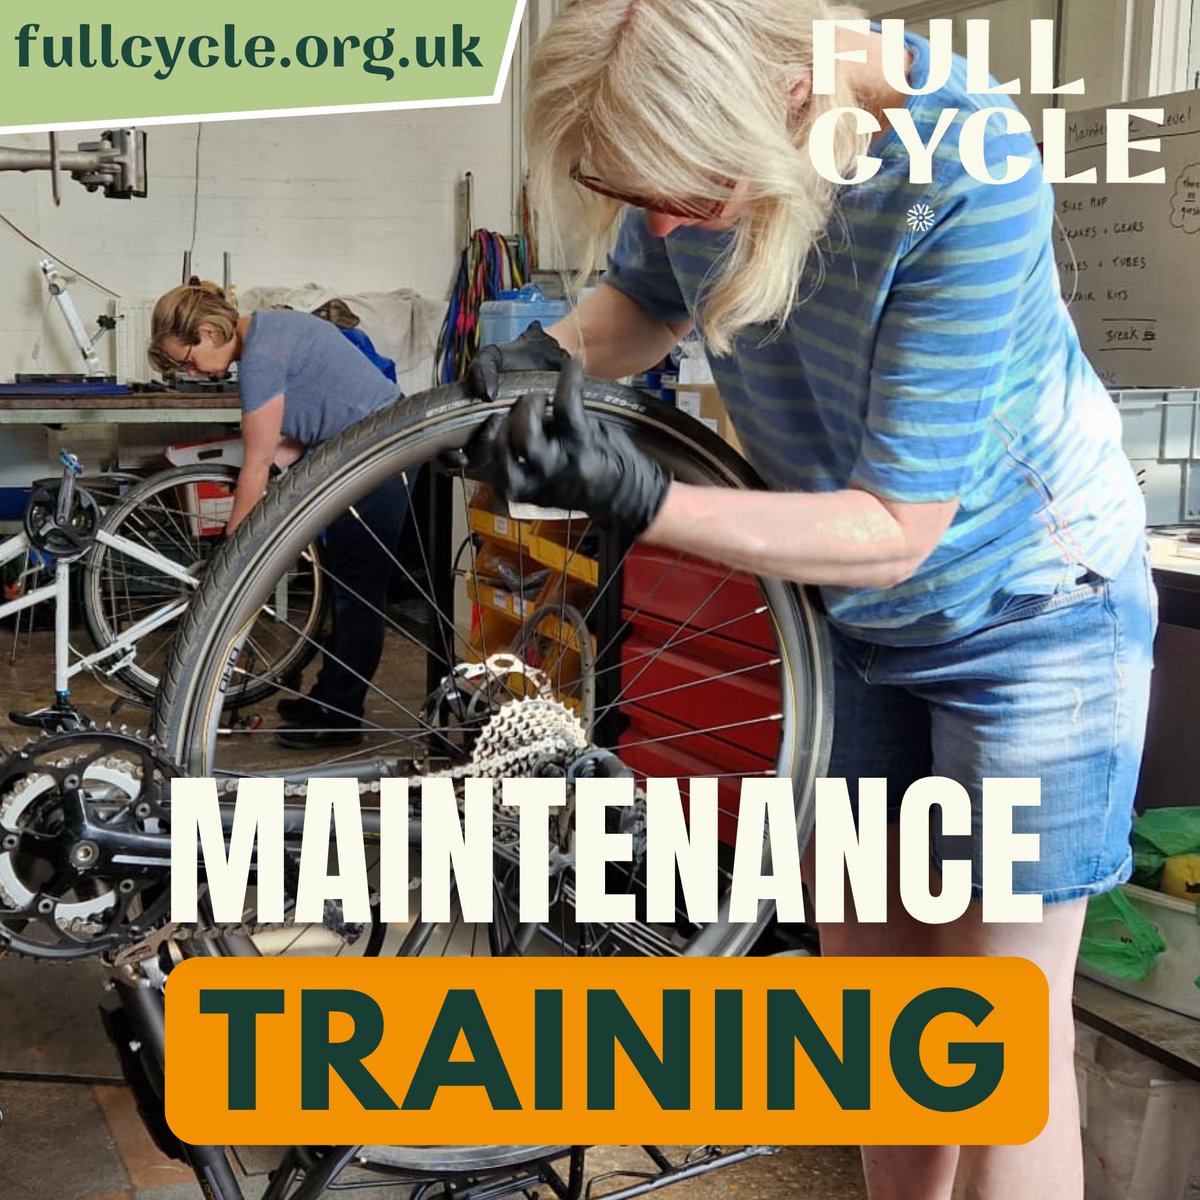 What better way to mark London's Repair Week than by picking up practical tips on how to keep your bike happy? To save money as well as the planet, sign up for one of our regular friendly courses on fullcycle.org.uk/maintenance-tr… #LocalRepairHeroes #RepairWeekLDN #GreenerKingston🔧♻️🚲